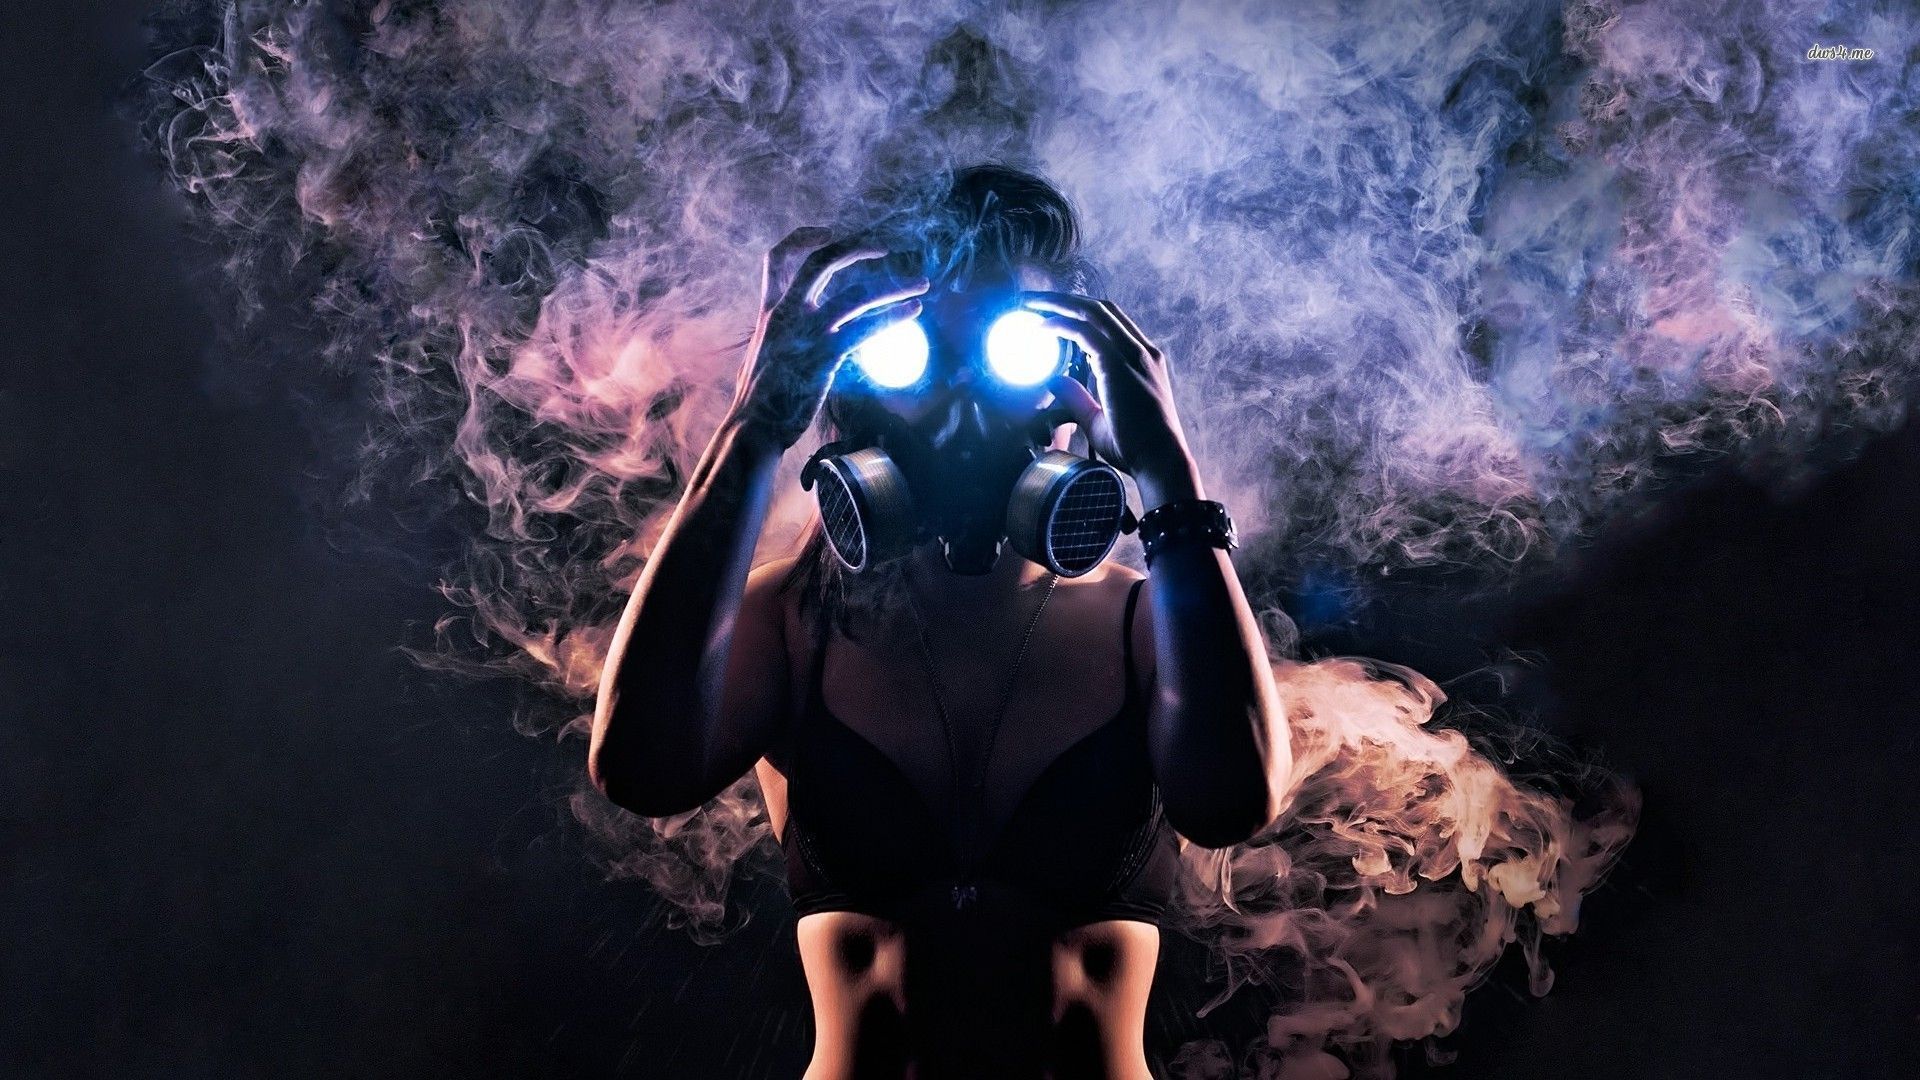 Woman in gas mask wallpaper - Photography wallpapers - #15291